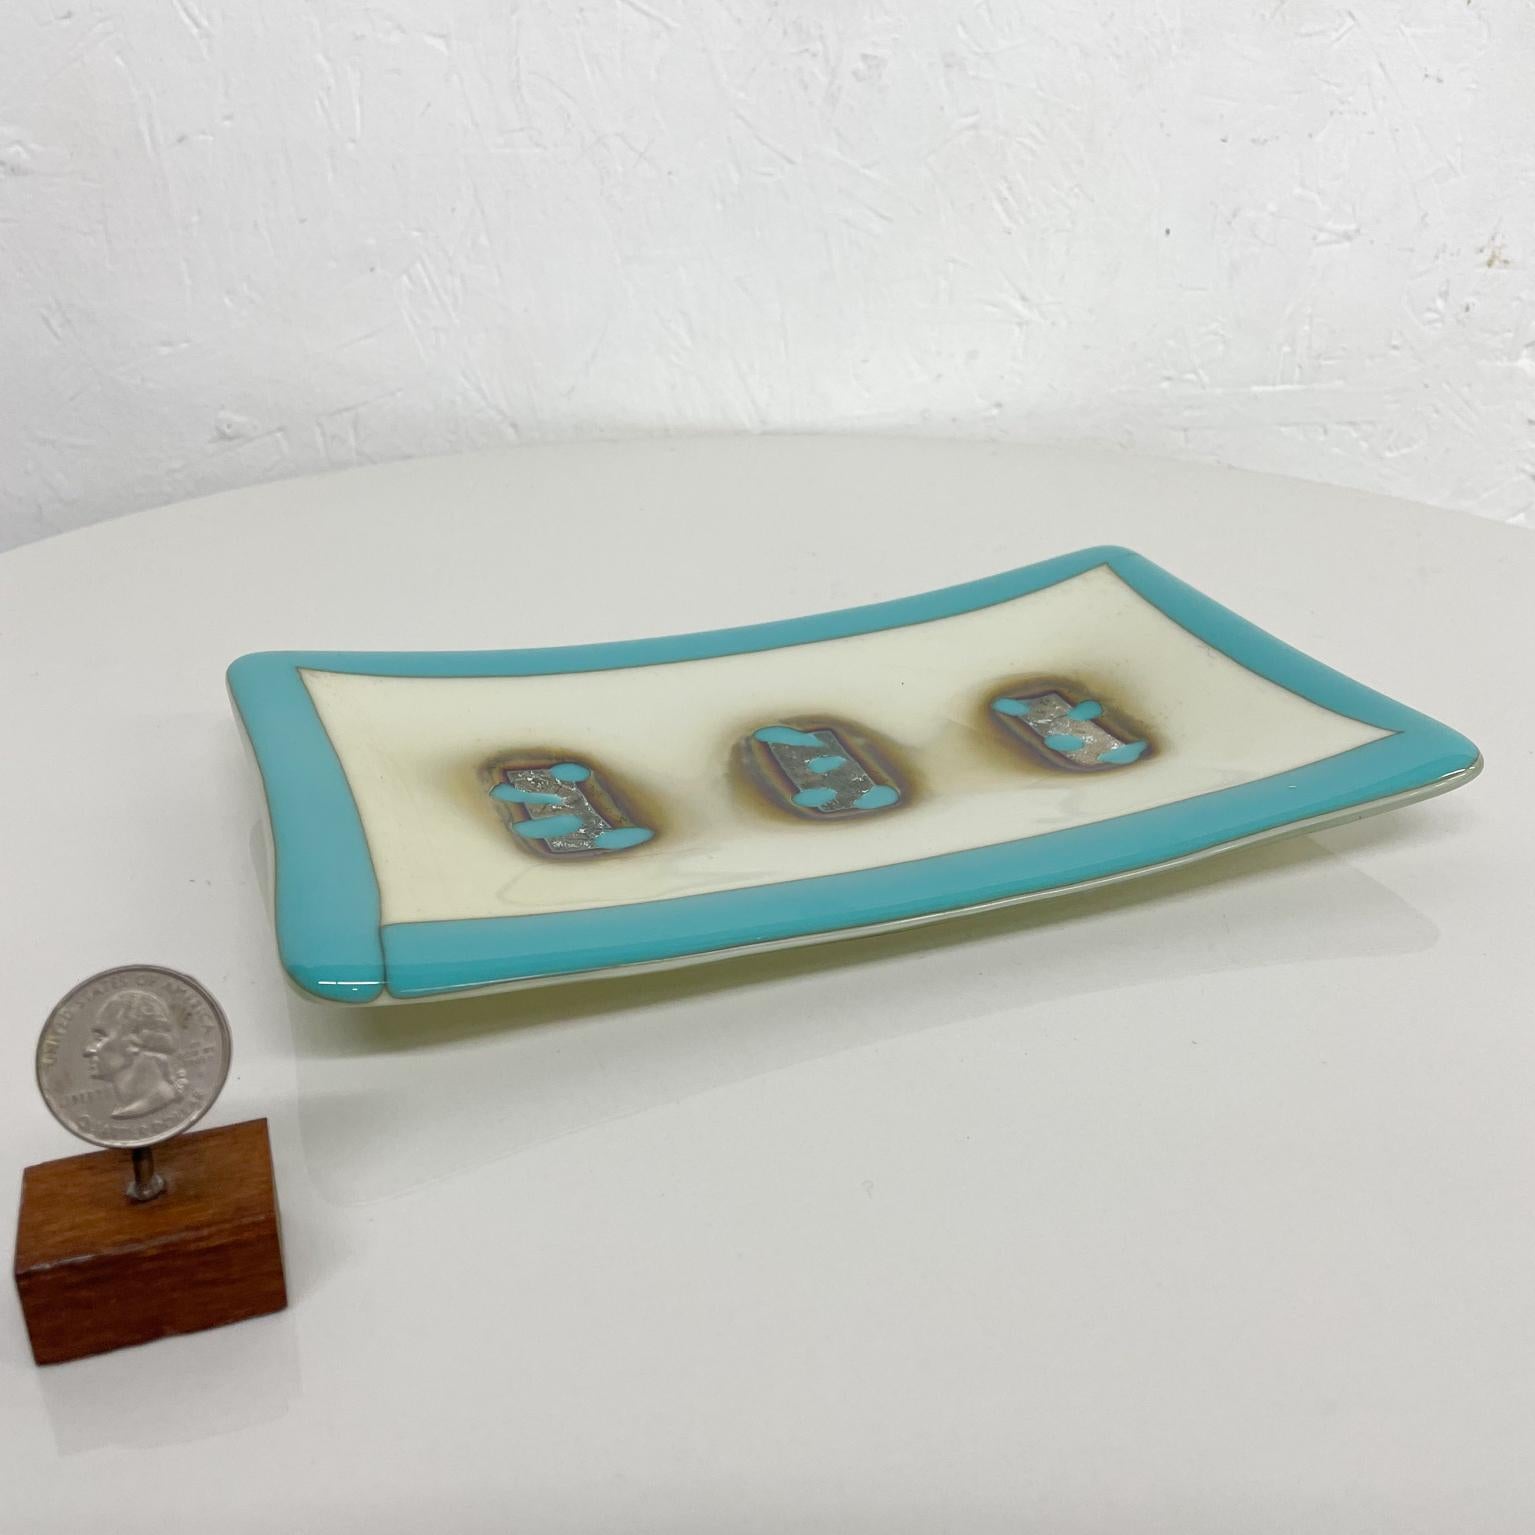 Modern Dish
Abstract Modern Design Stunning Art Glass decorative Dish Blue and White 1960s
Measures: 9.5 w x 5.63 d x 1 tall
No signature present.
Preowned original unrestored vintage condition.
Review all images.

